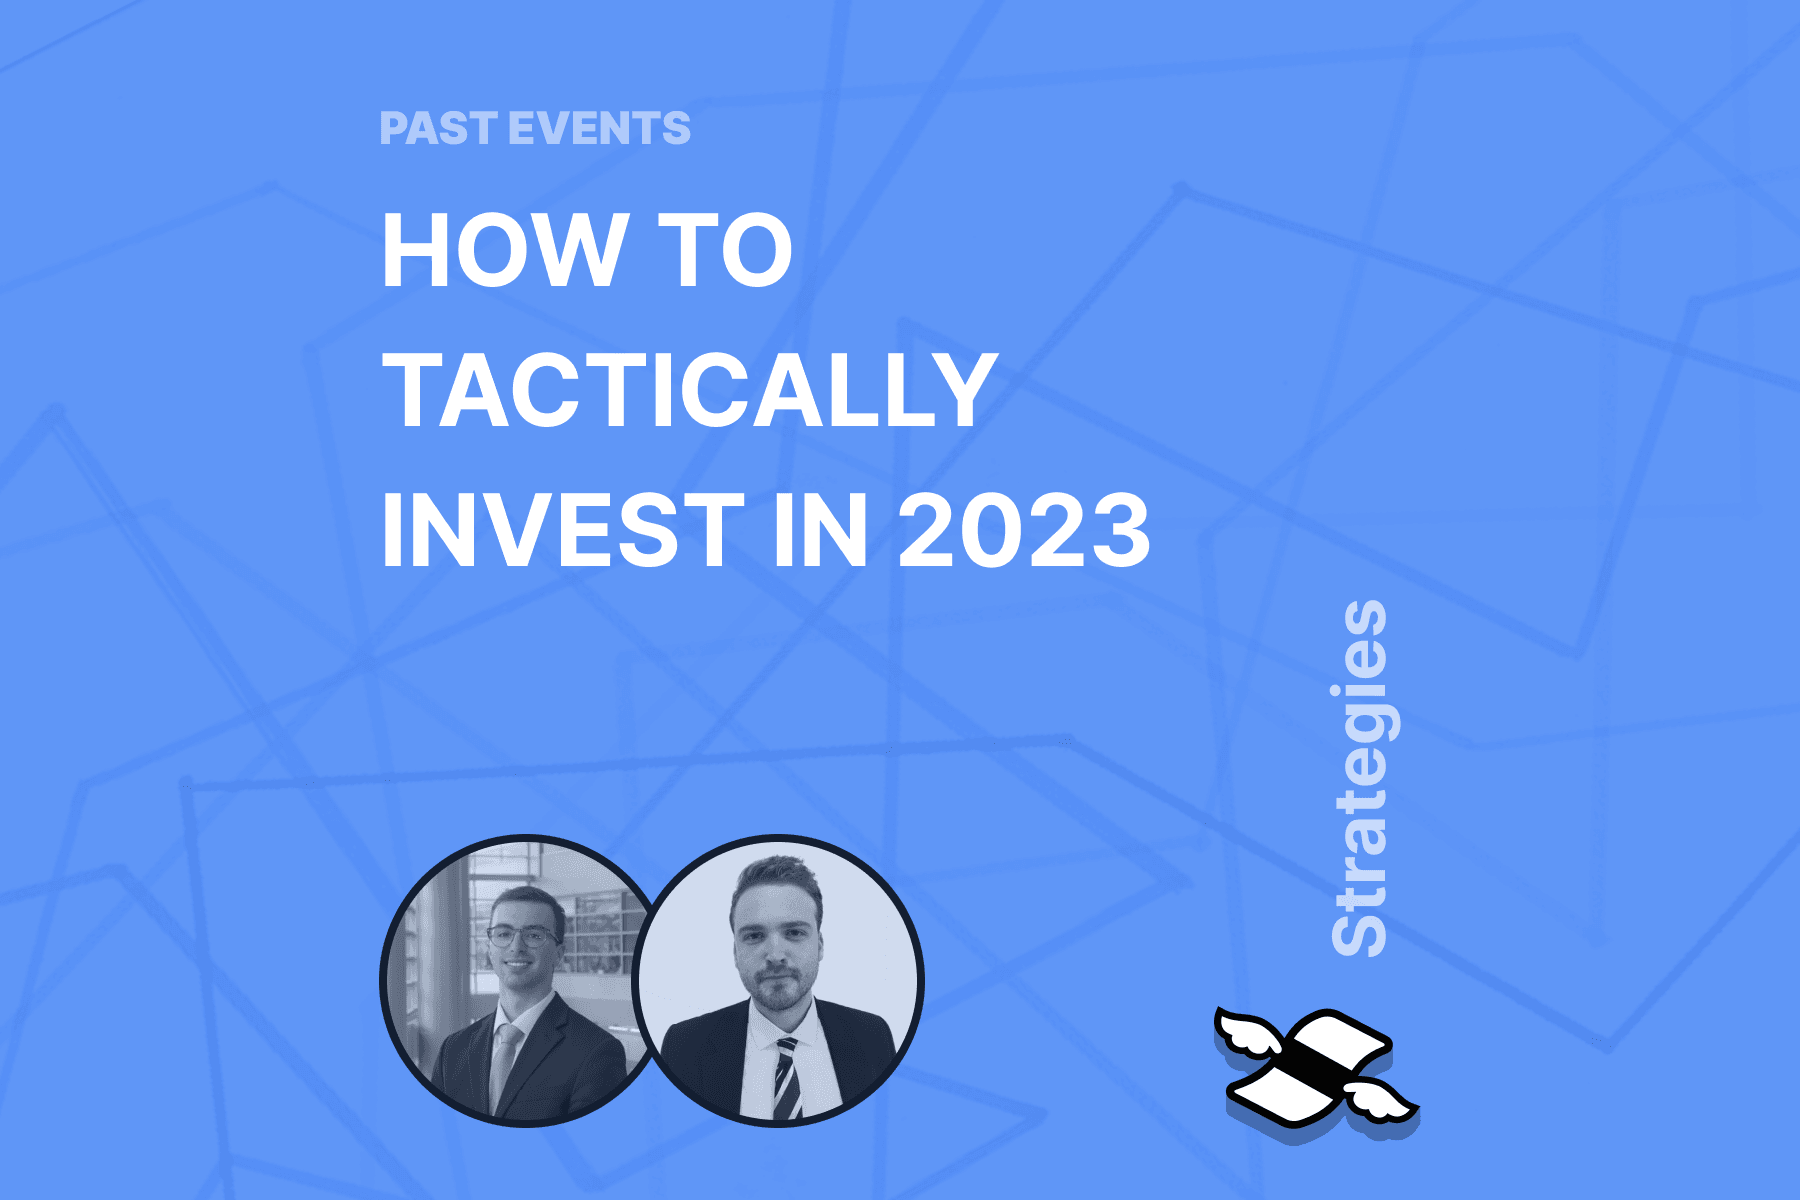 How to Tactically Invest in 2023